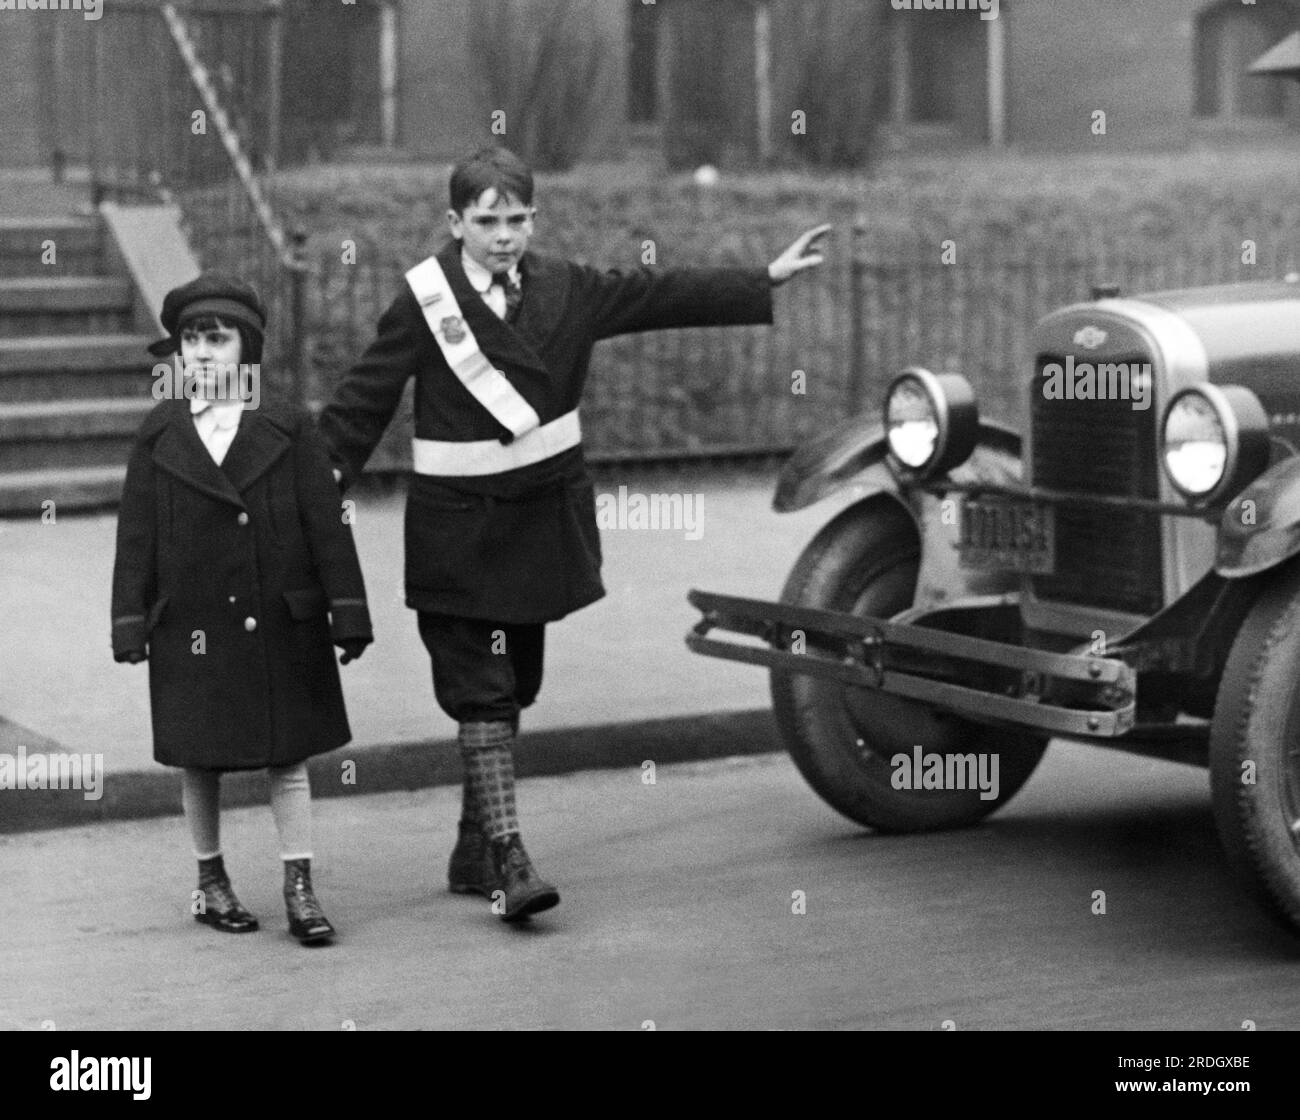 Washington, D.C.:  c. 1928 A schoolboy crossing gusrd stops traffic to let a young girl student cross the street. Stock Photo